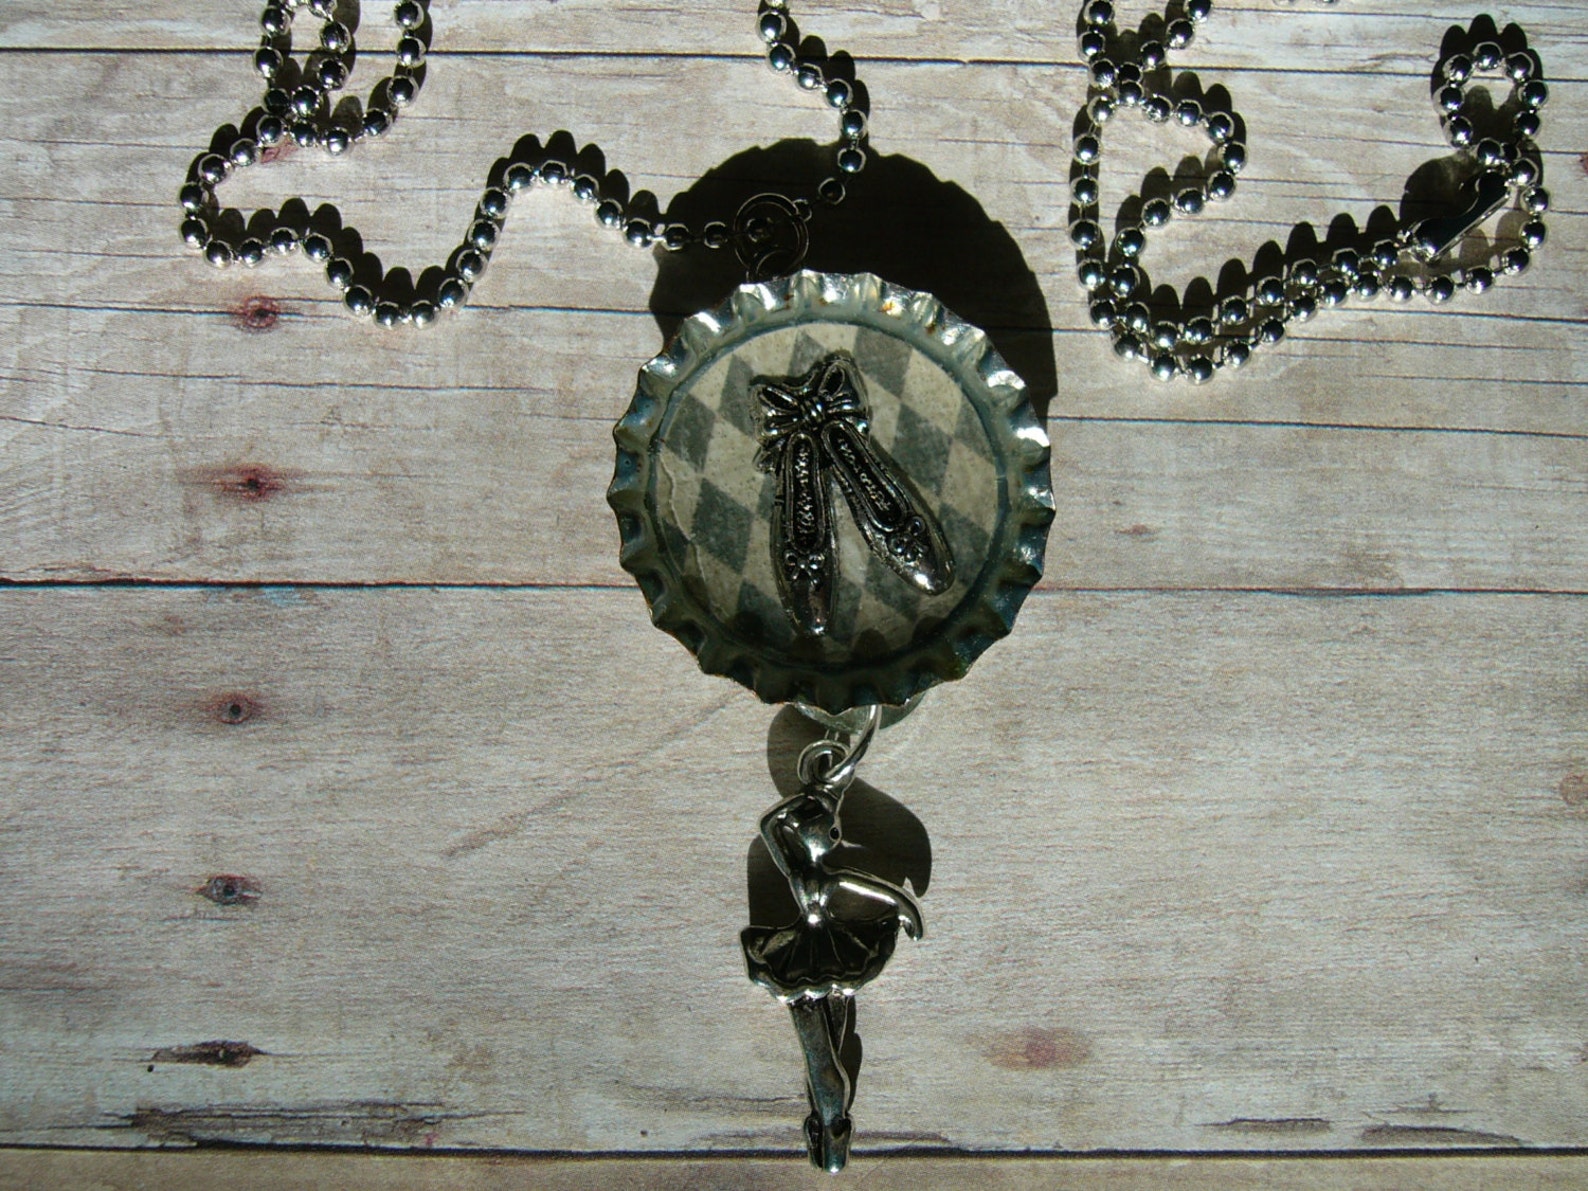 the magic of dance, a bottle cap pendant with a pair of ballet shoes on a harlequin patterned background and a 3d ballet dancer